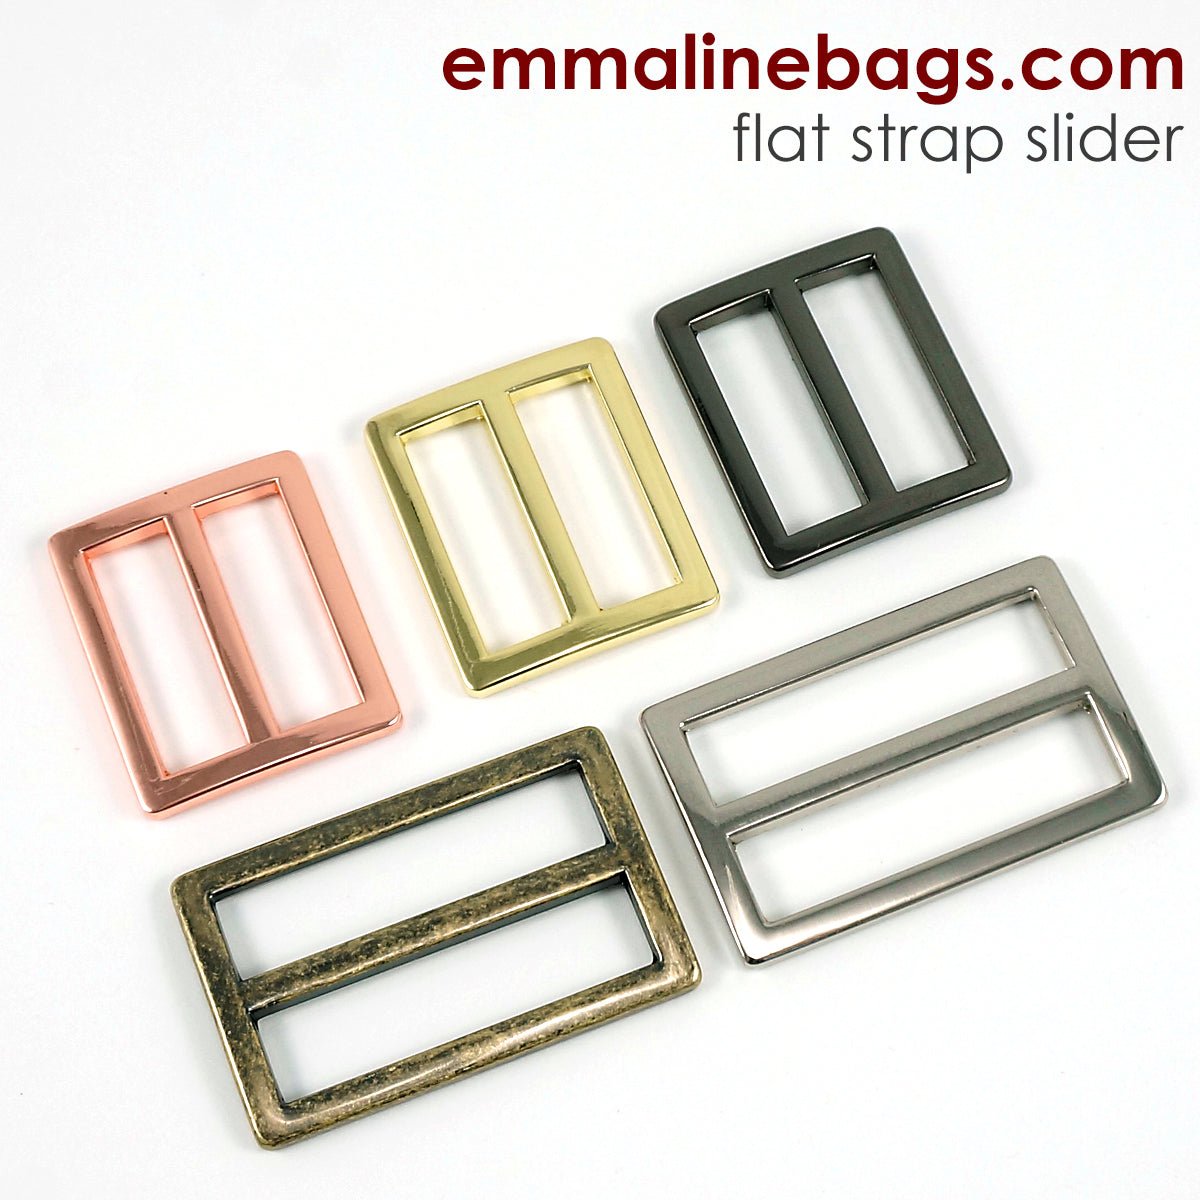 Wide Mouth Strap Sliders - (Extra Wide) For thicker straps (2 Pieces)